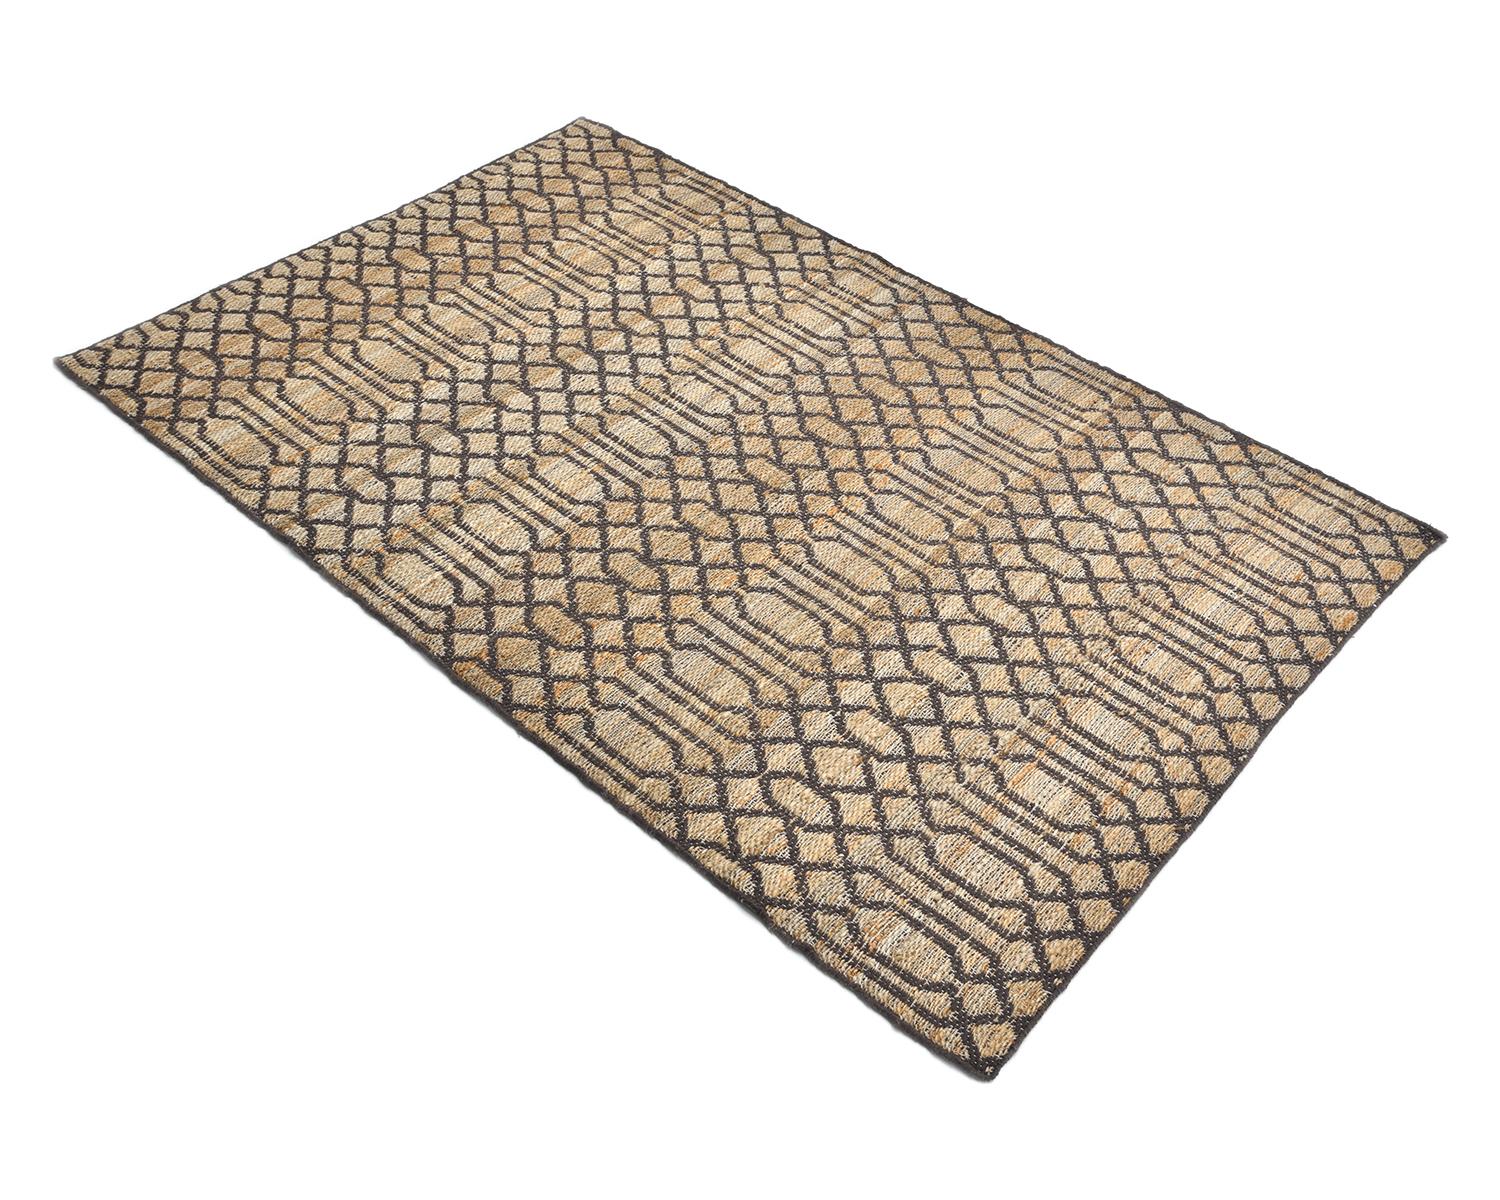 Solo Rugs Transitional Jute Trellis Hand Woven Brown Area Rug 1